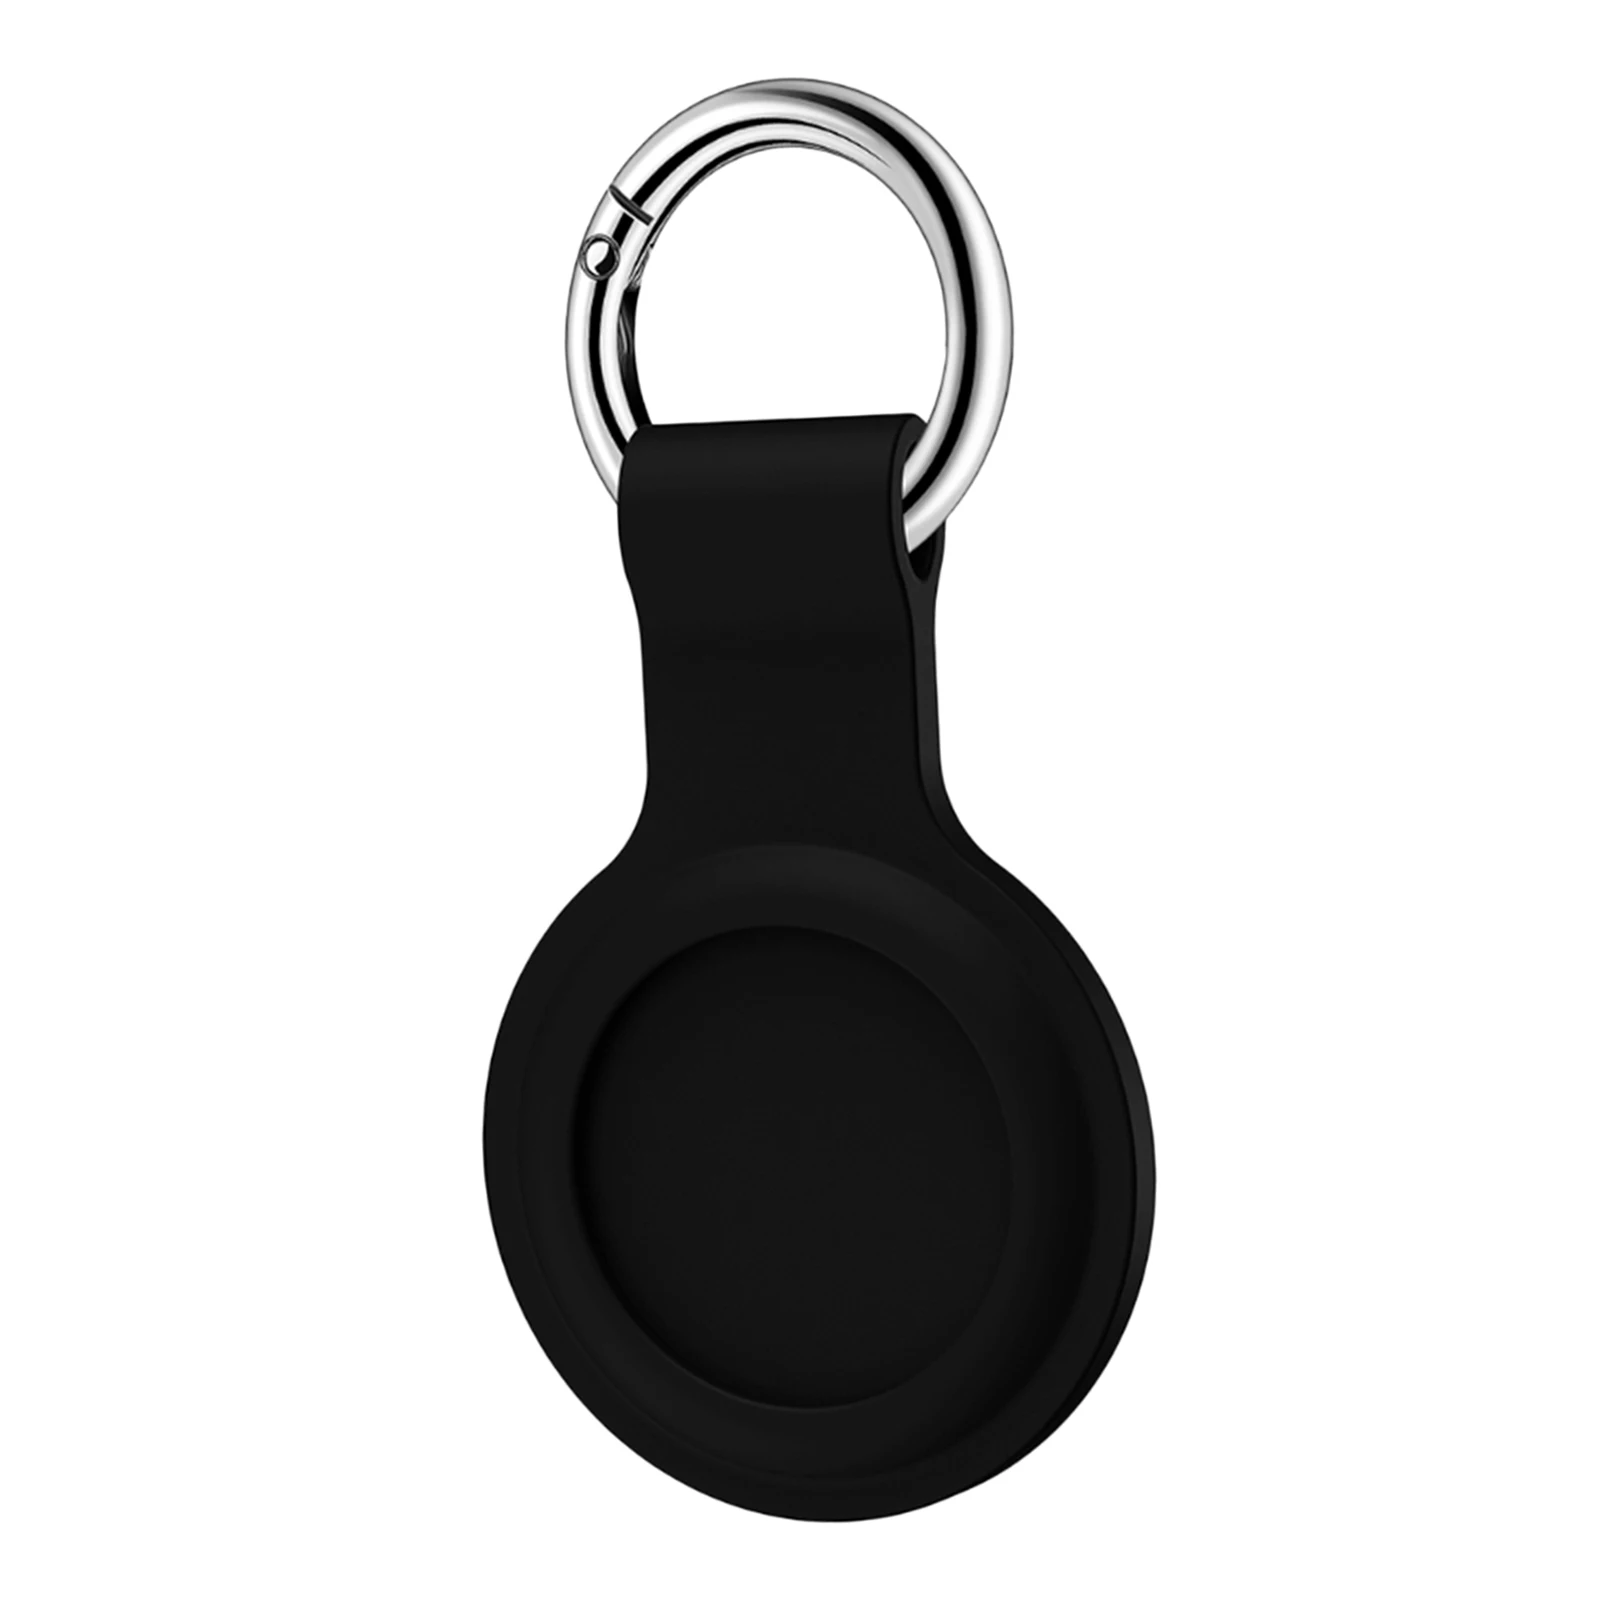 Soft Silicone Protective Cover Skin Case Keychain Compatible with AirTags